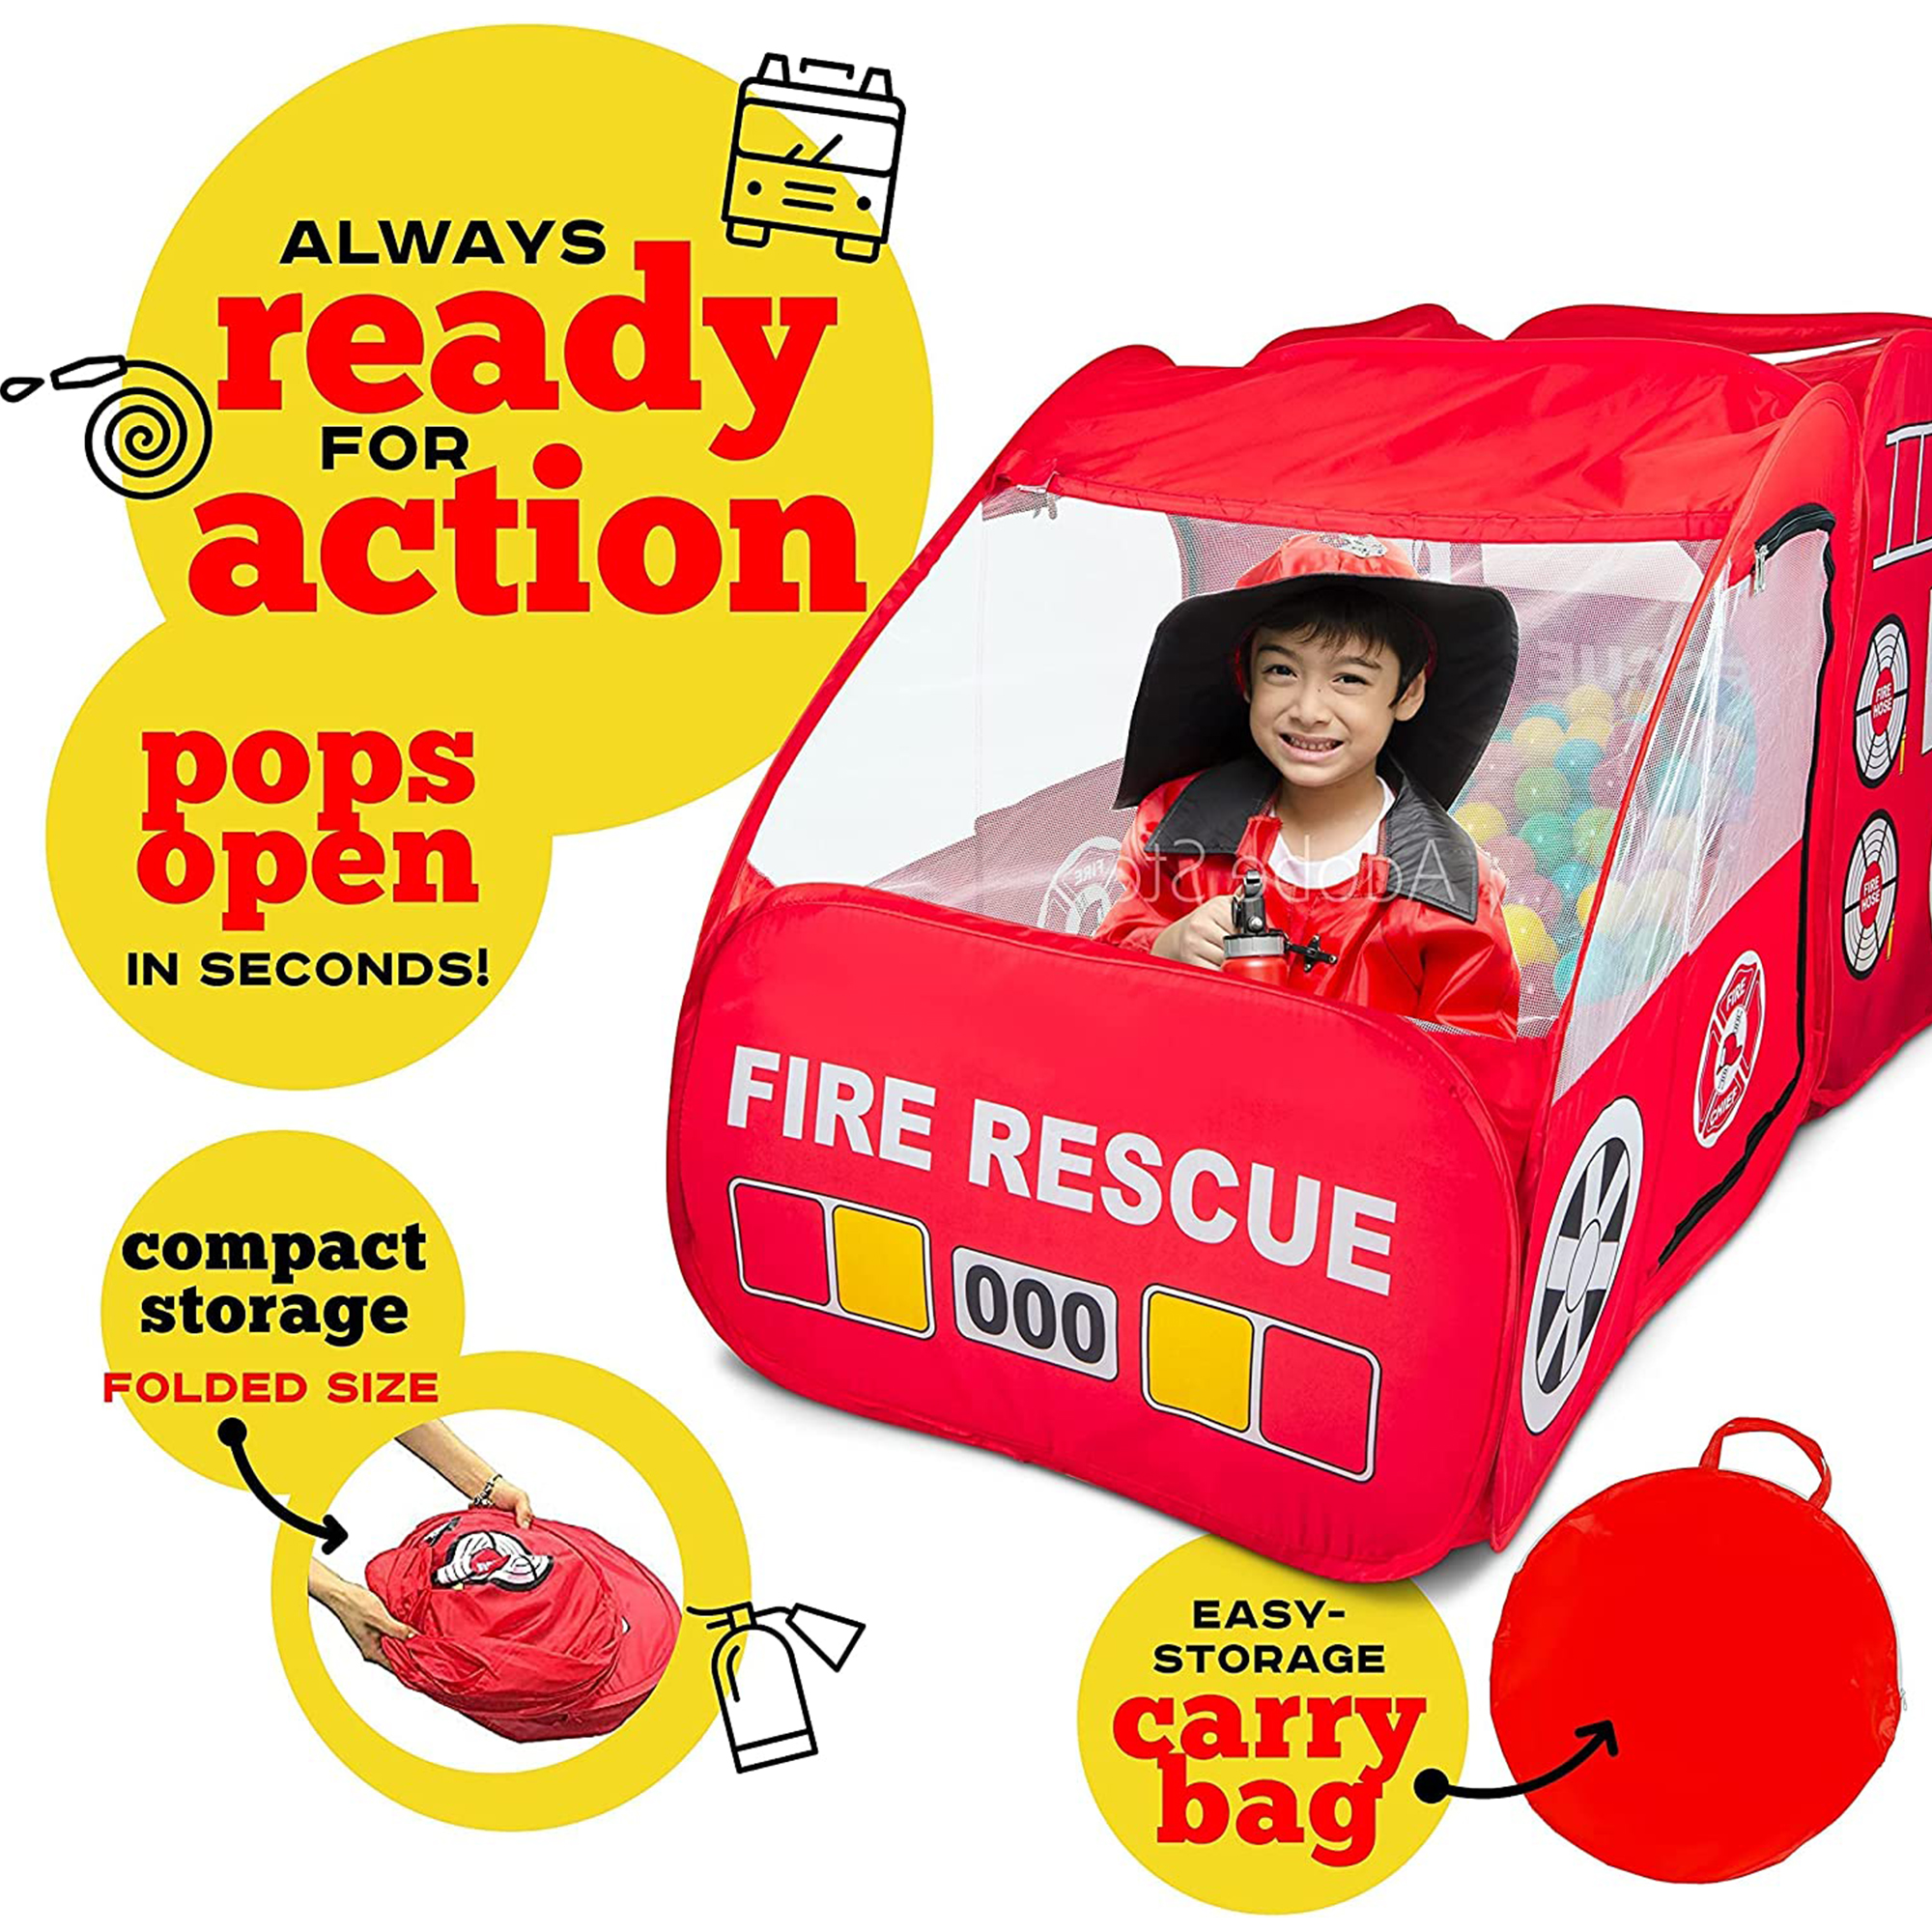 Kiddzery Pretend Playhouse Fire Truck Pop Up Play Tent for Kids with Siren Sound, Red - image 3 of 9